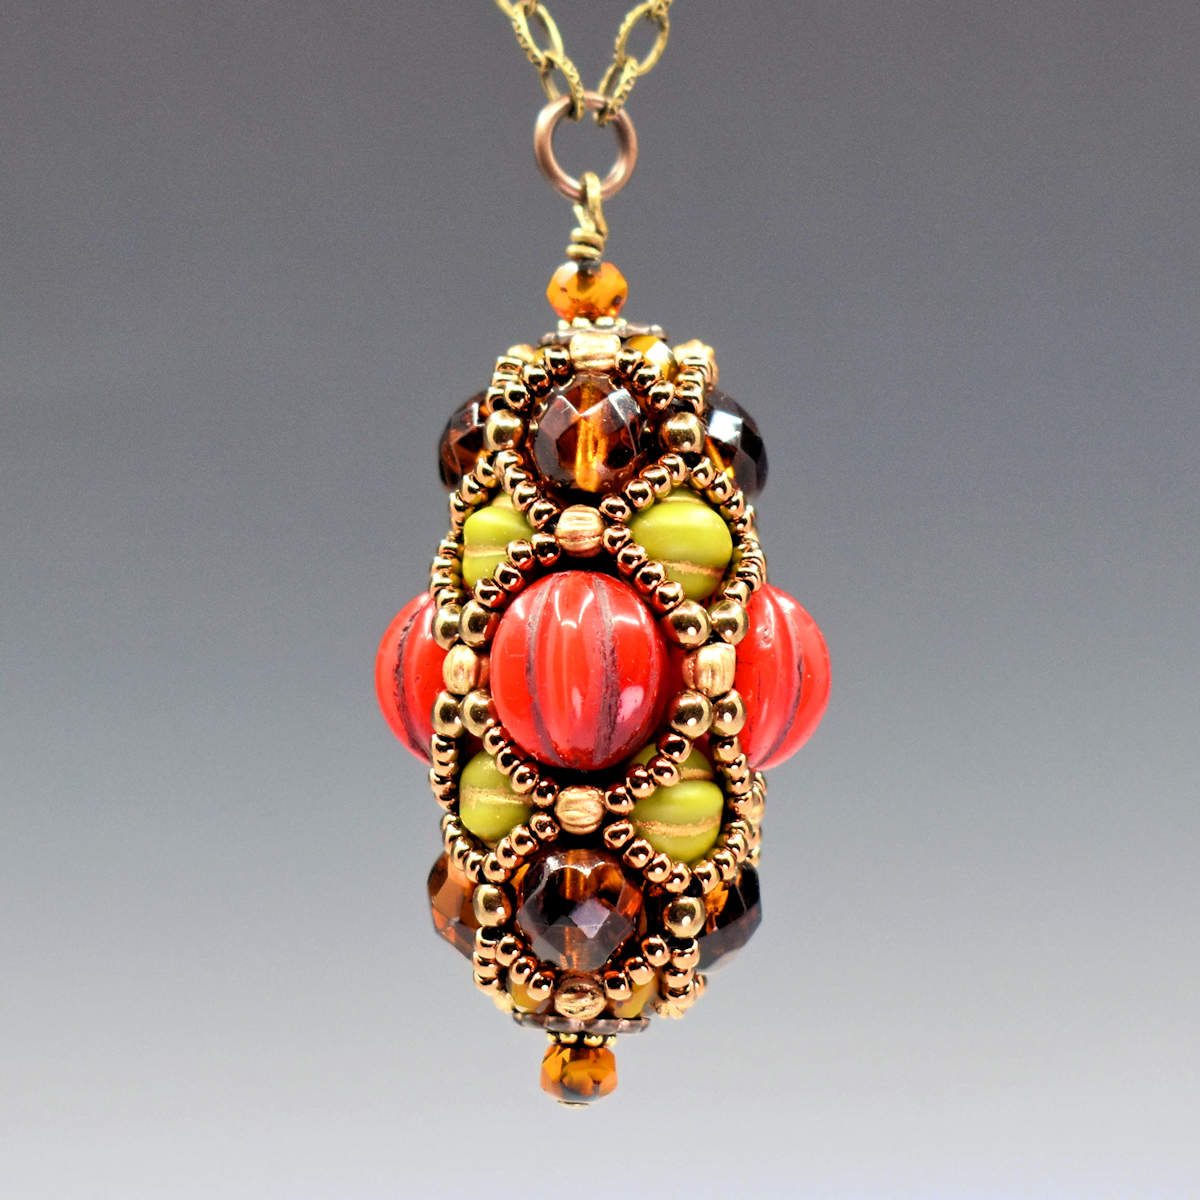 A beaded pendant that is egg shaped hangs from a gold colored chain, against a gray background. The widest part of the pendant is ridged warm red beads, and then ridged avocado beads are nestled between the red beads and an outer layer of varigated transparent amber beads. A netted layer of gold seed beads is overlaid, outlining the red, green, and brown beads. 